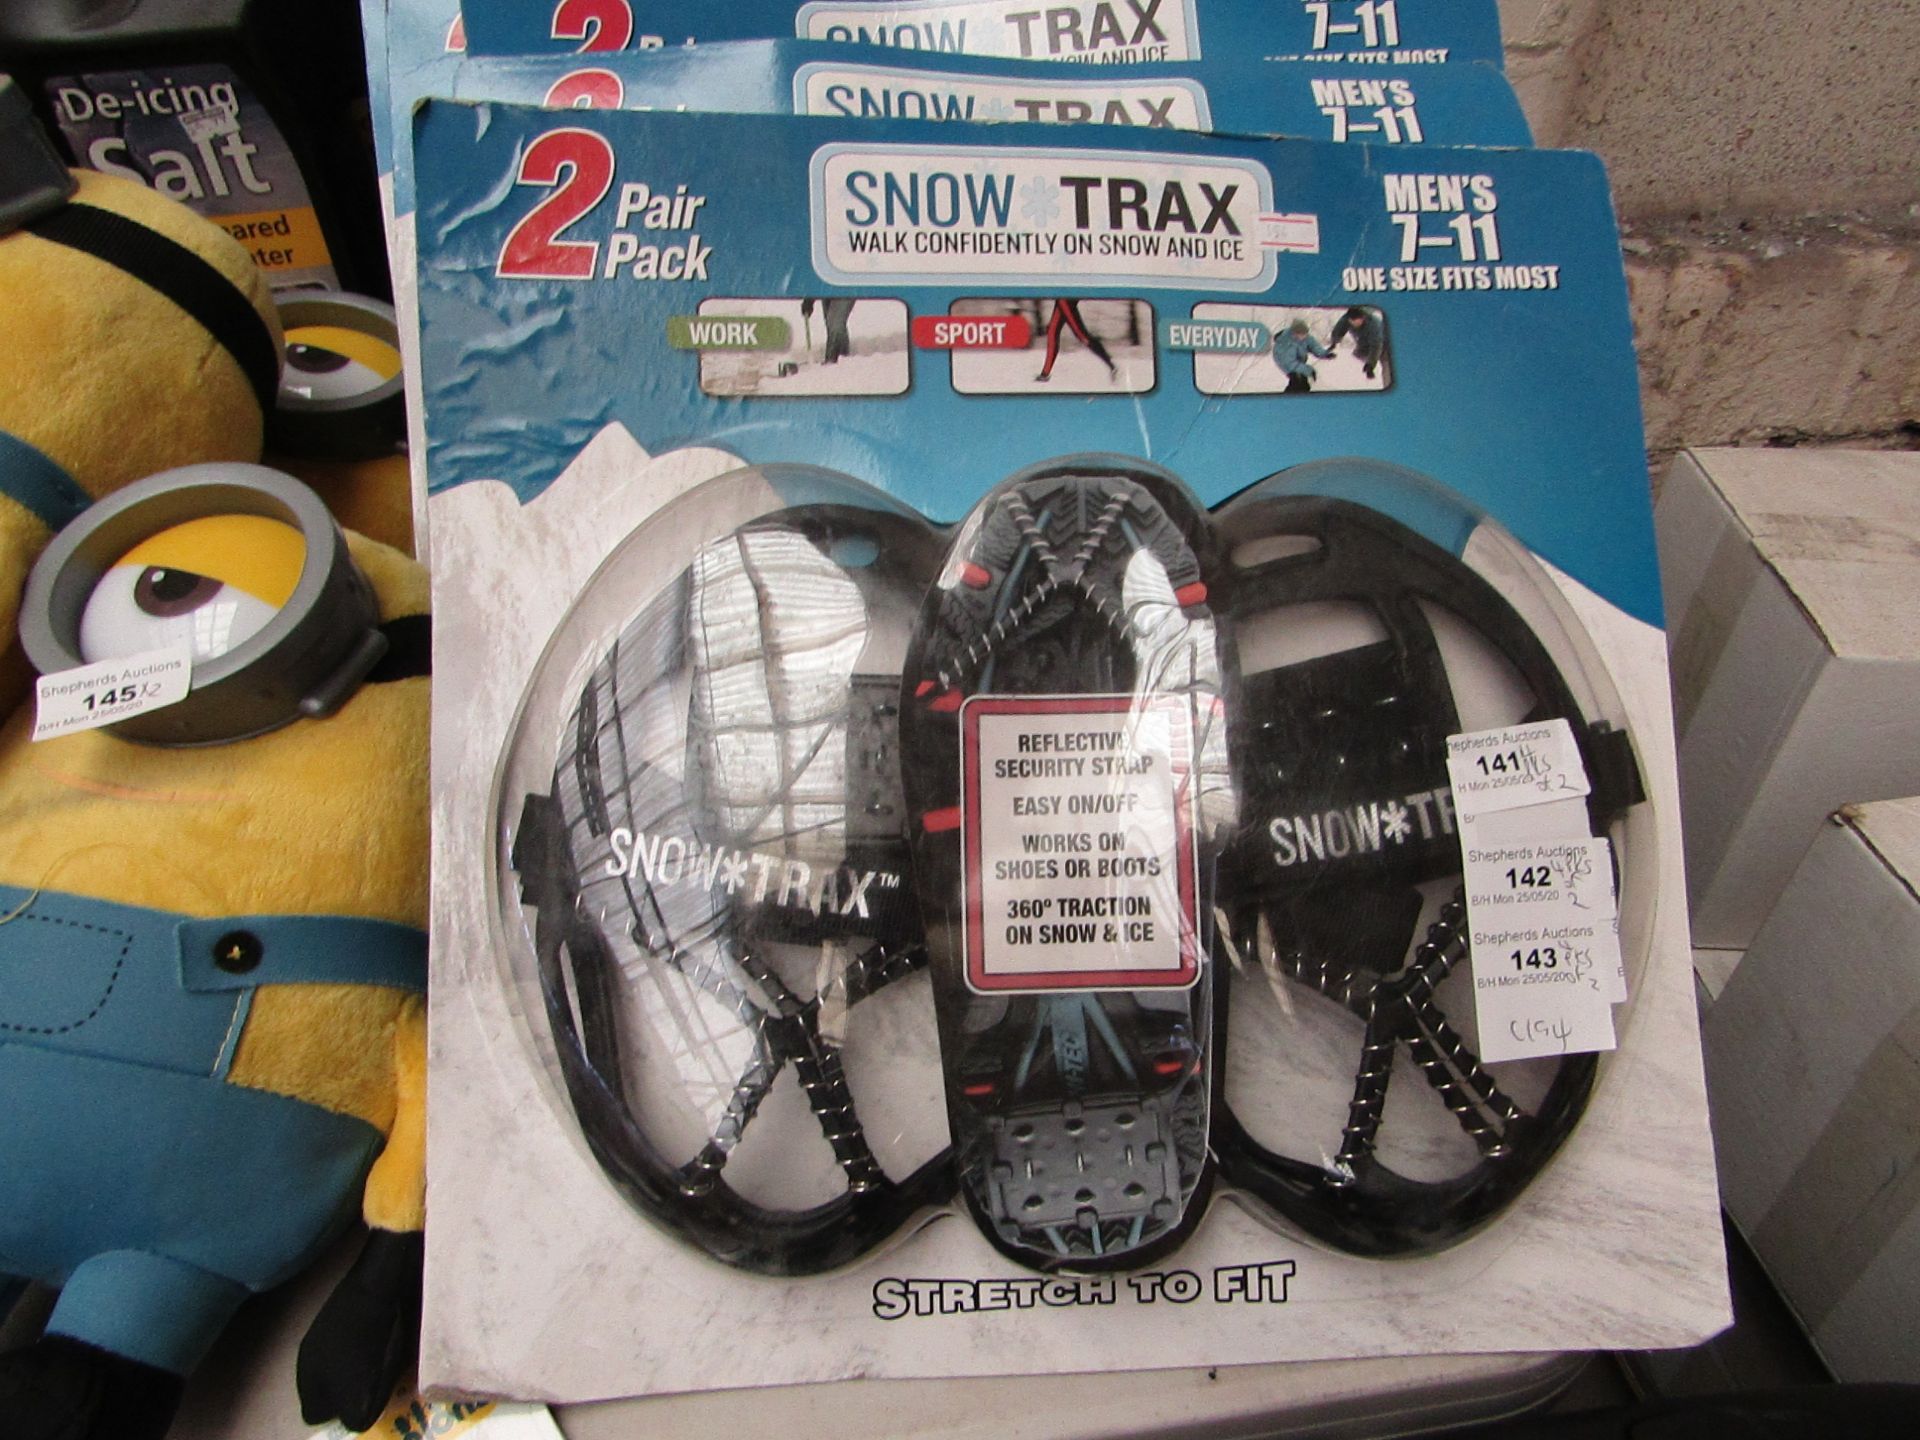 2 Packs of 2 Snow Trax Size 7 - 11. New & Packaged